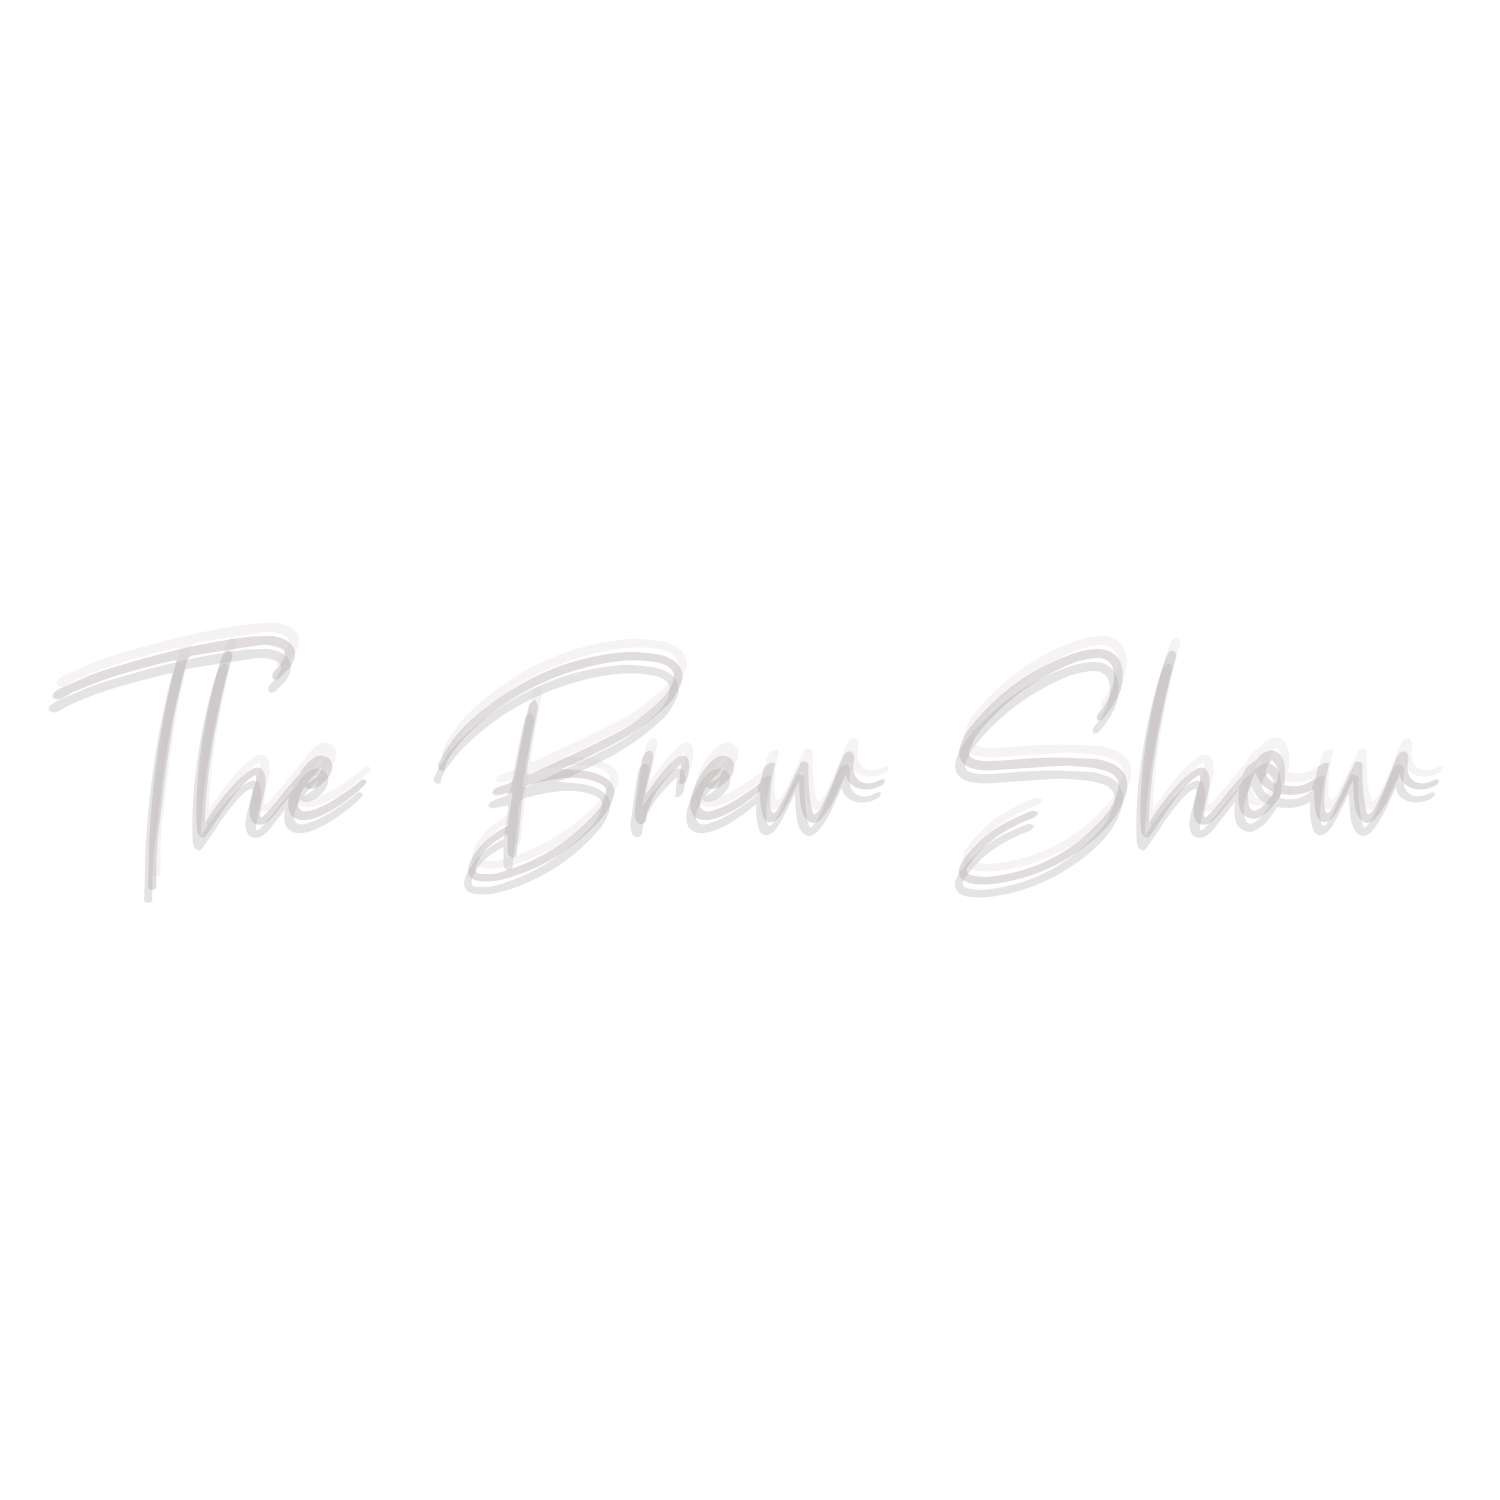 The Brew Show